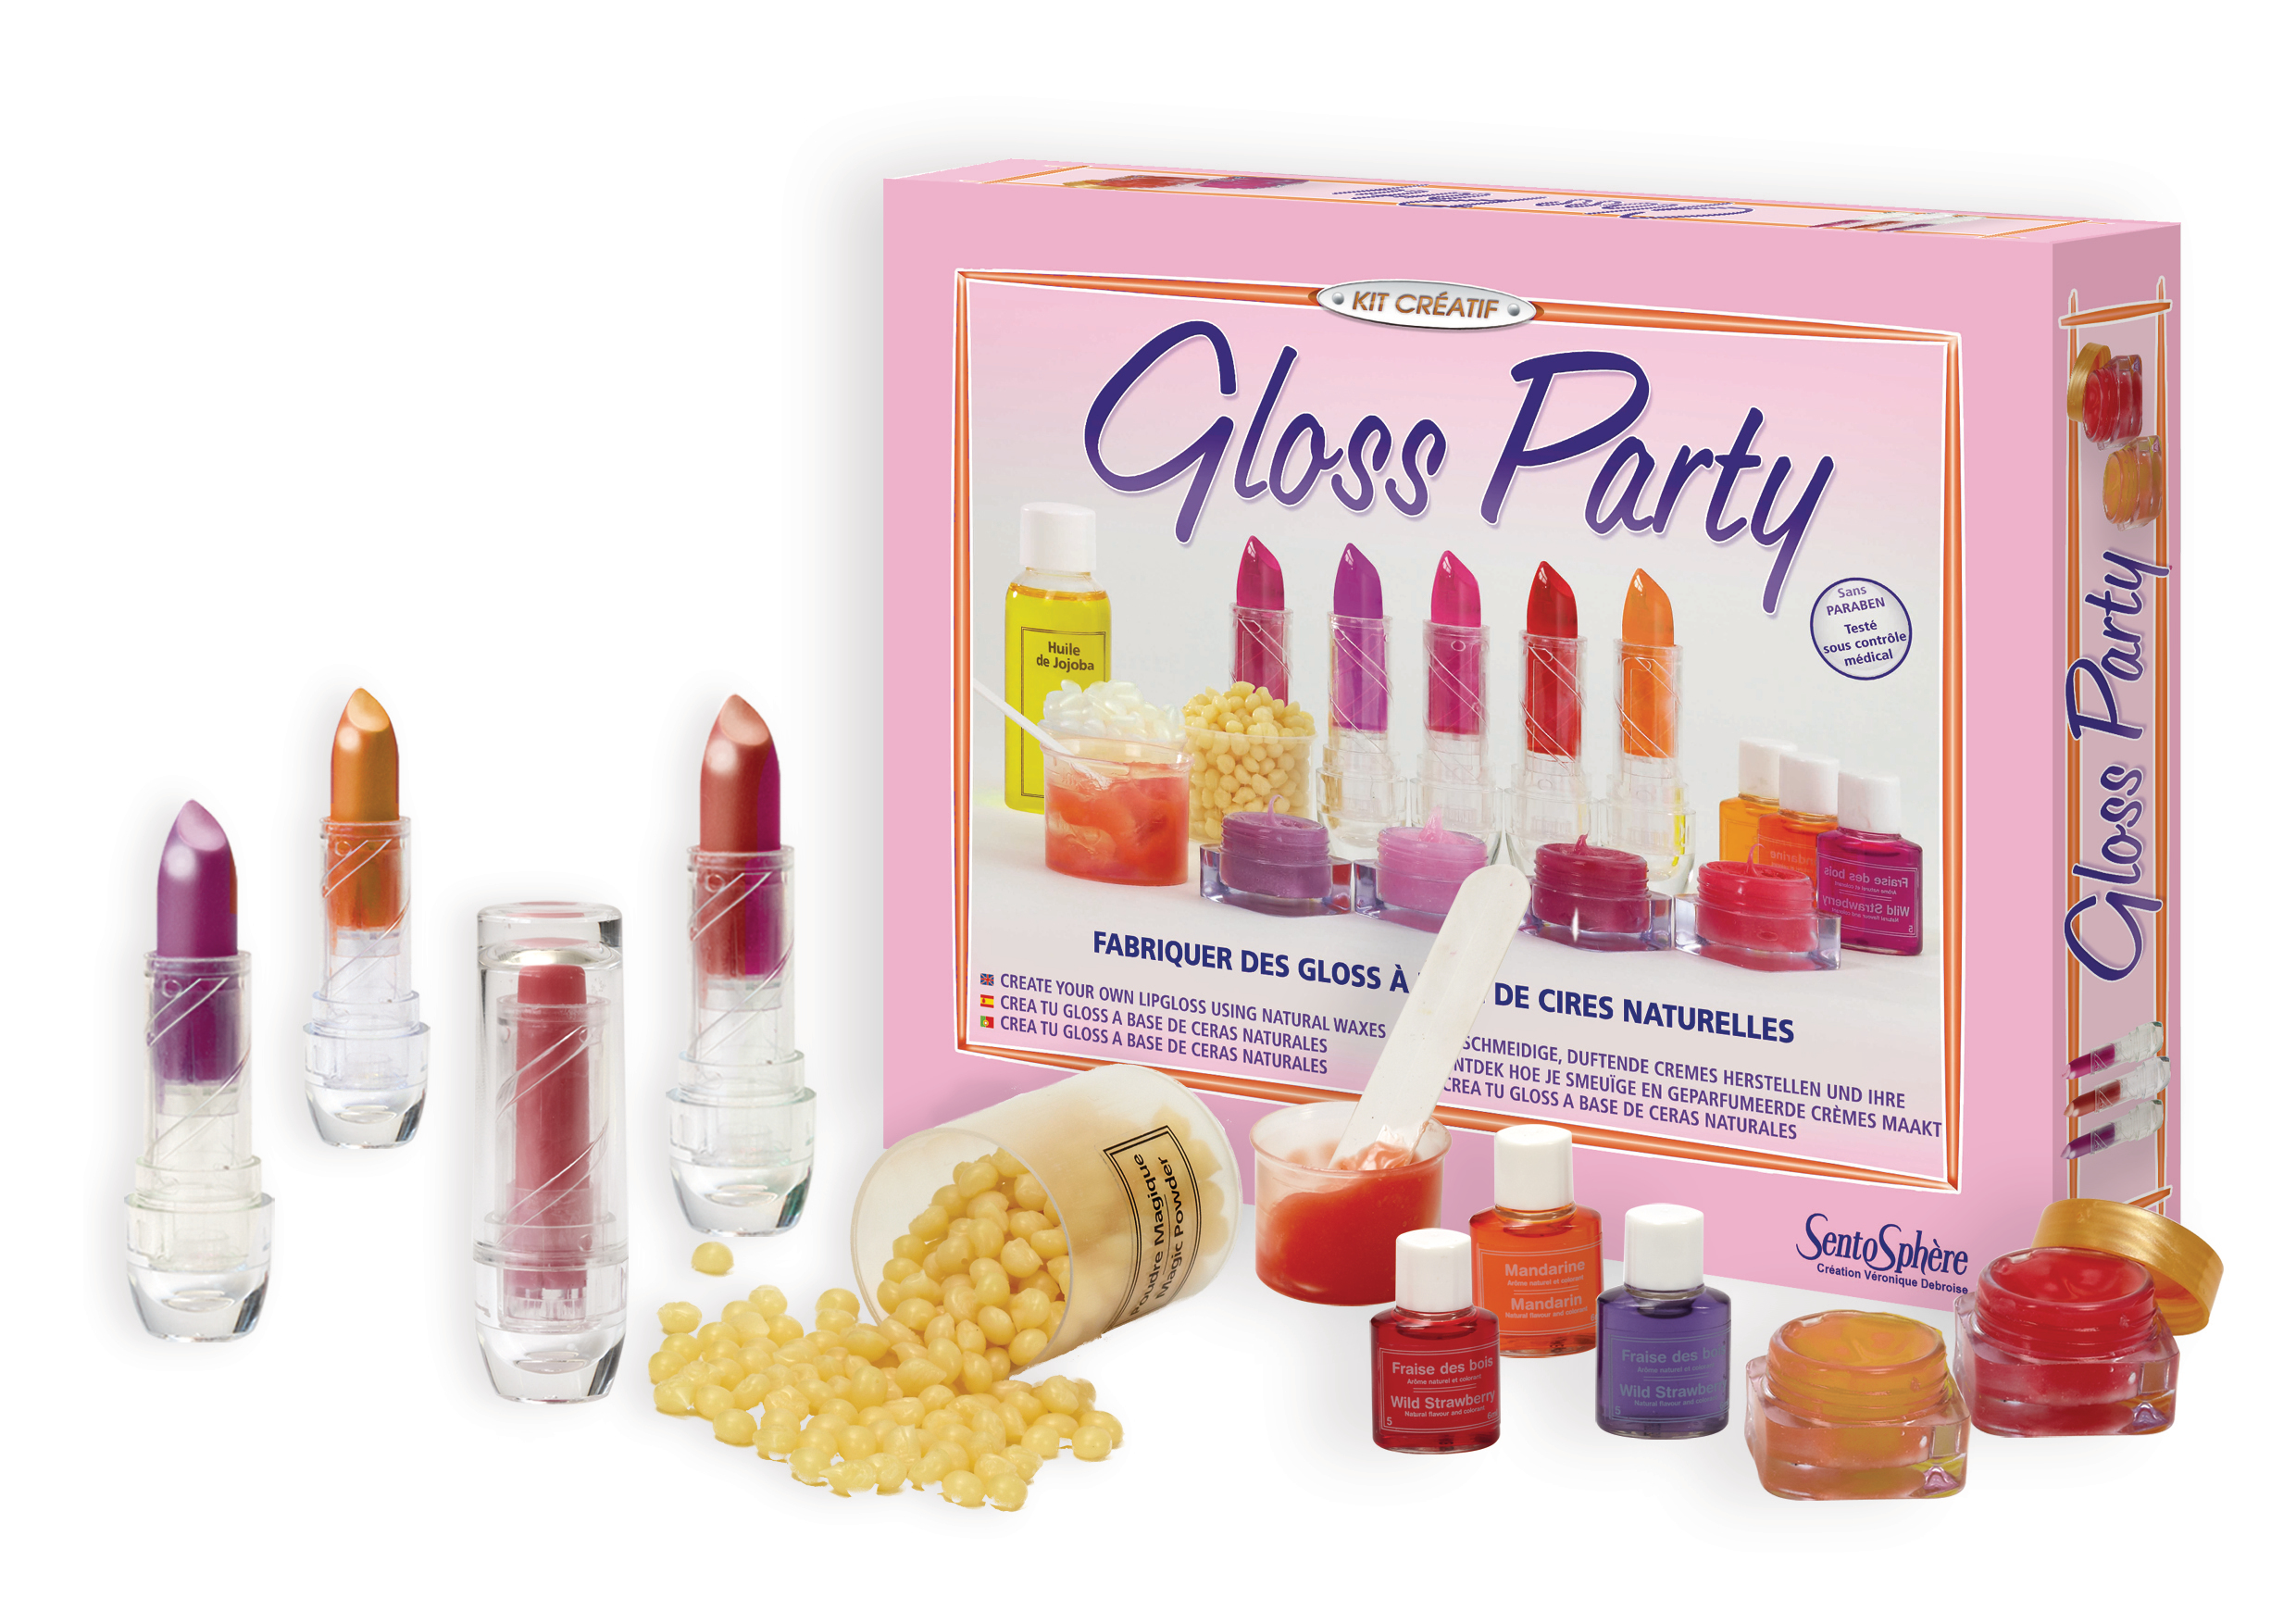 Gloss Party pas cher - Achat neuf et occasion